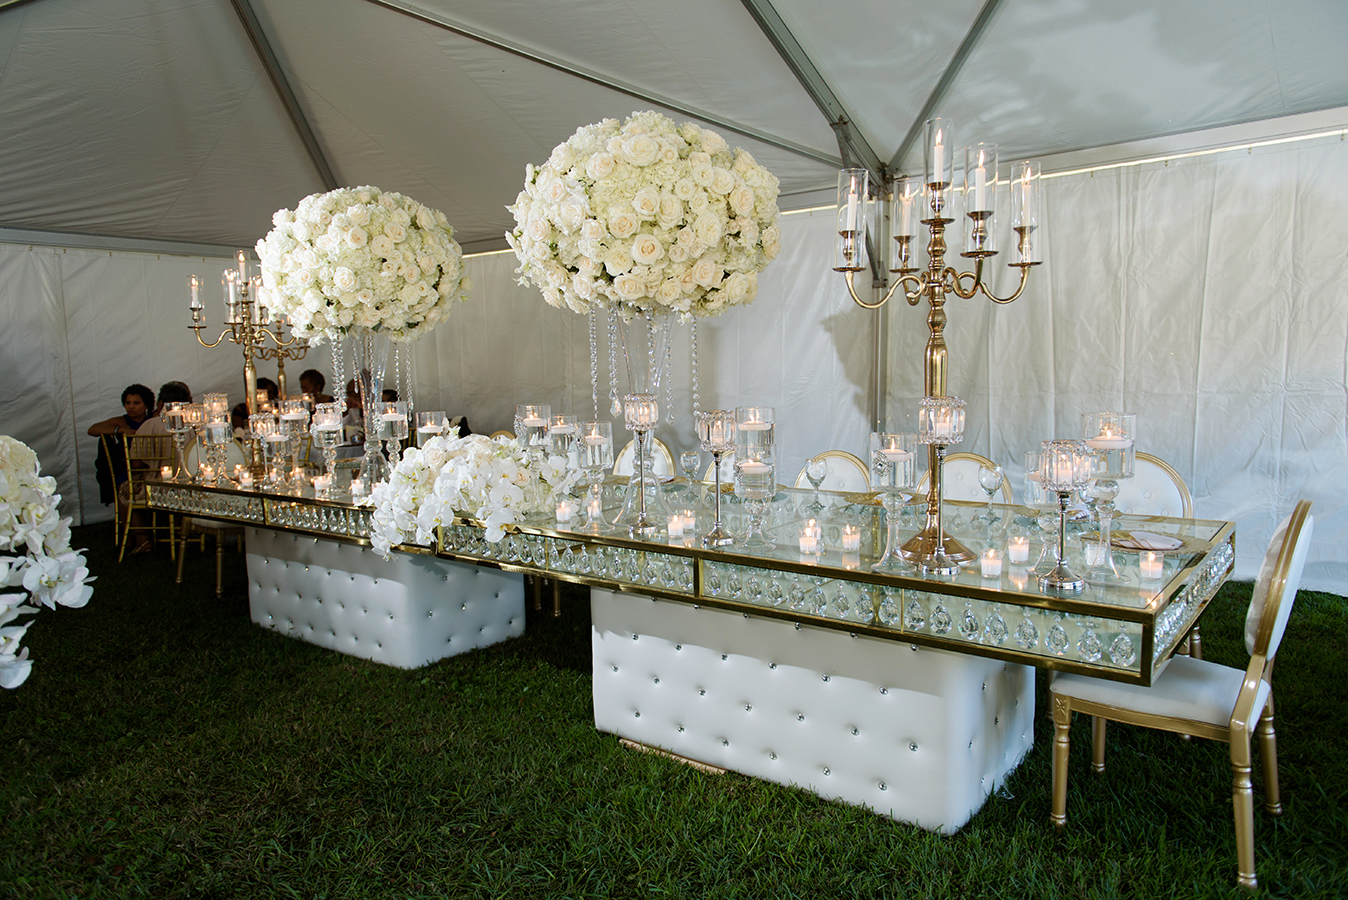 The mirrored bridal party table featured lush floral arrangements and gold candelabra.